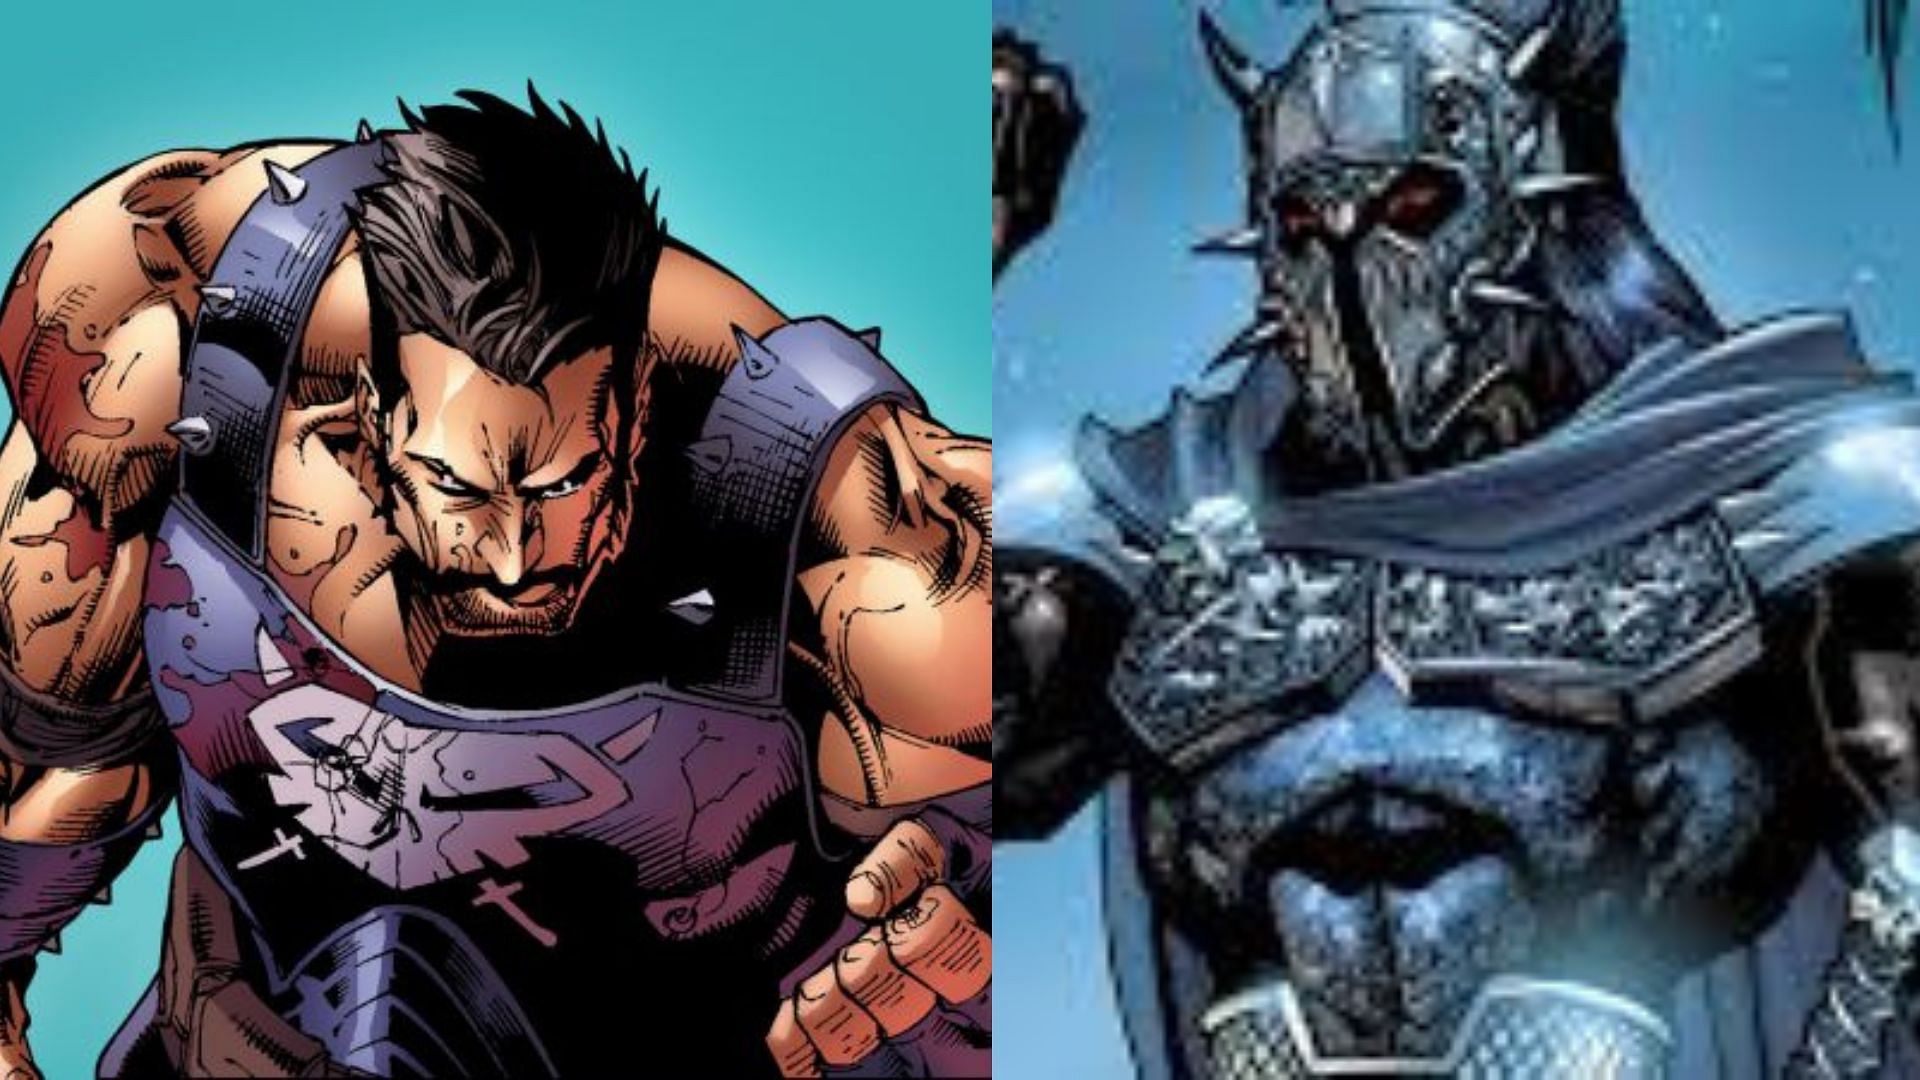 Ares is a Greek deity depicted in Marvel and DC Comics (Image via Marvel and DC)